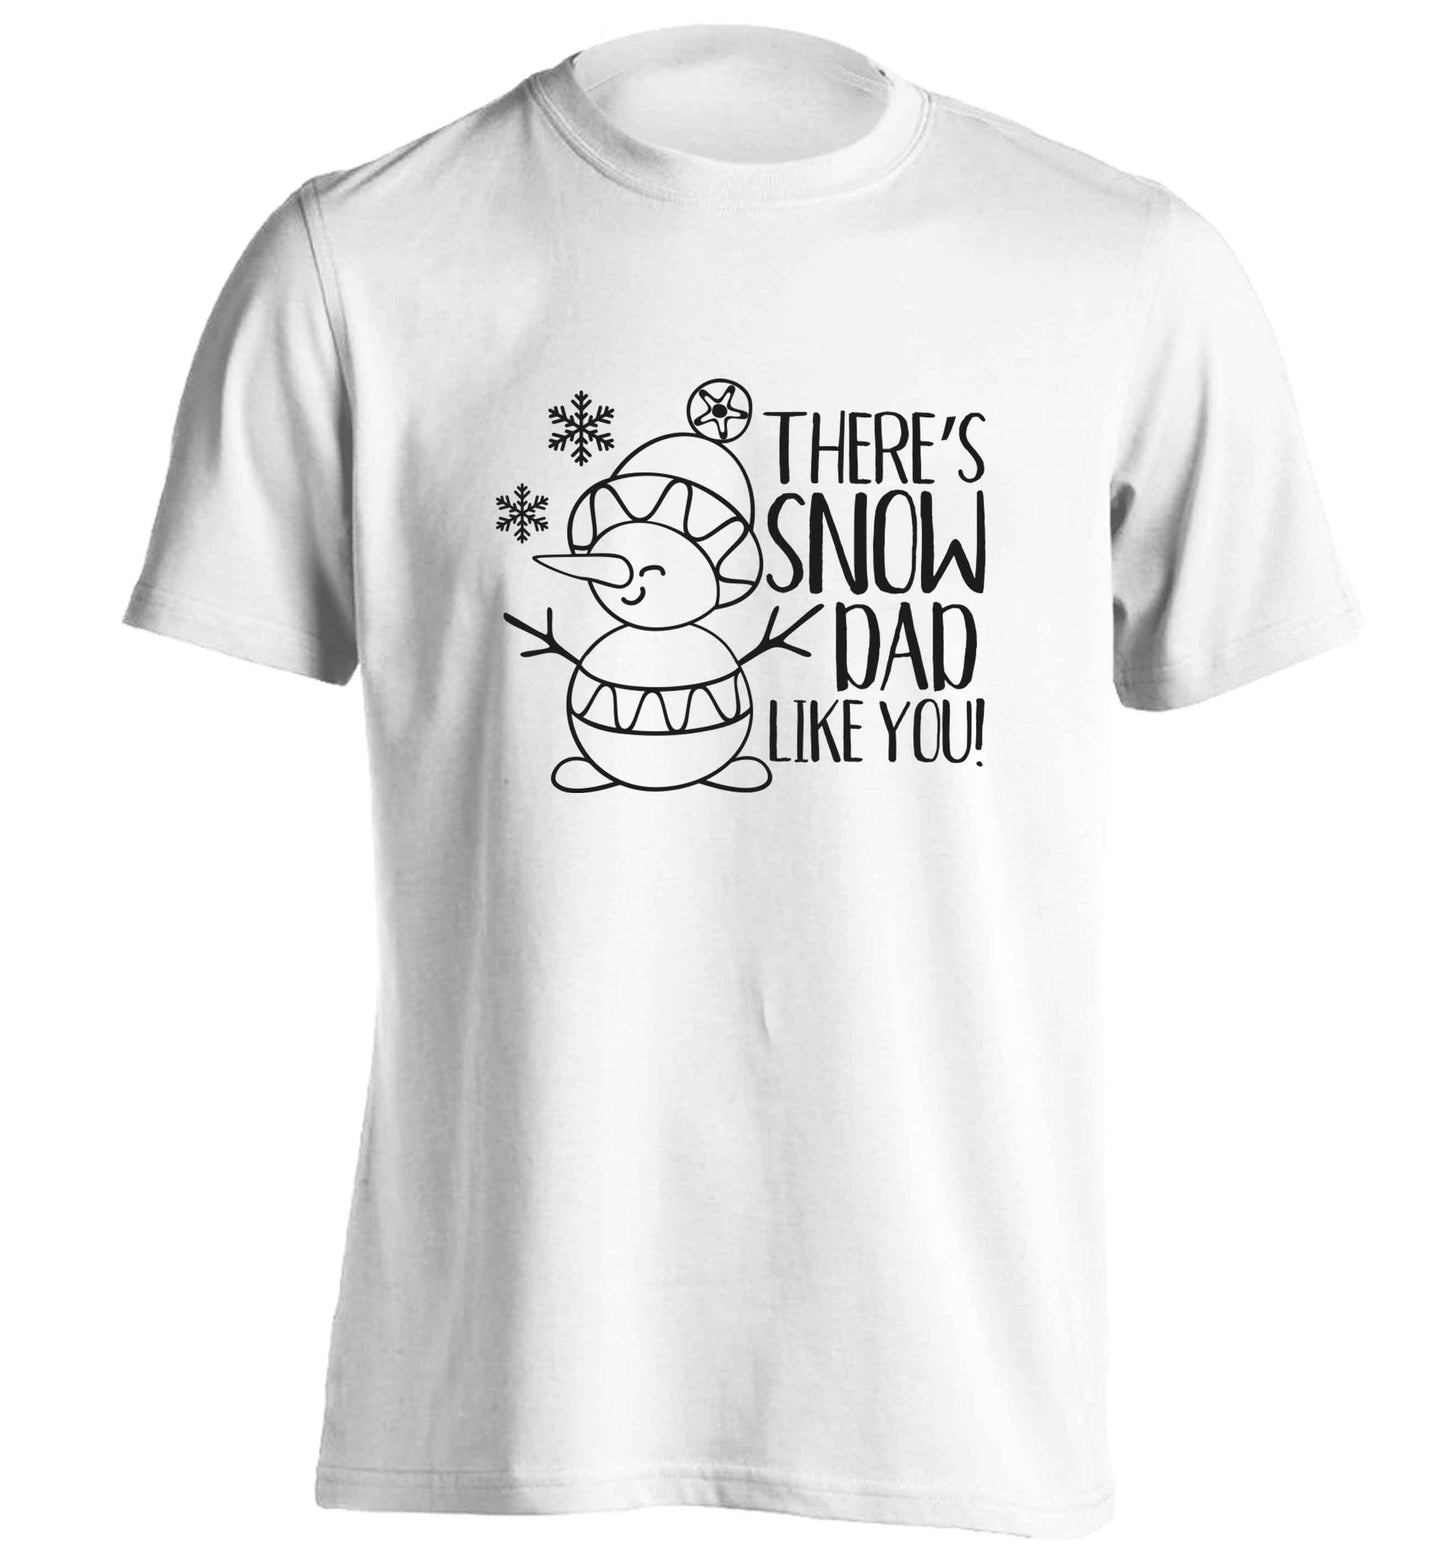 There's snow dad like you adults unisex white Tshirt 2XL